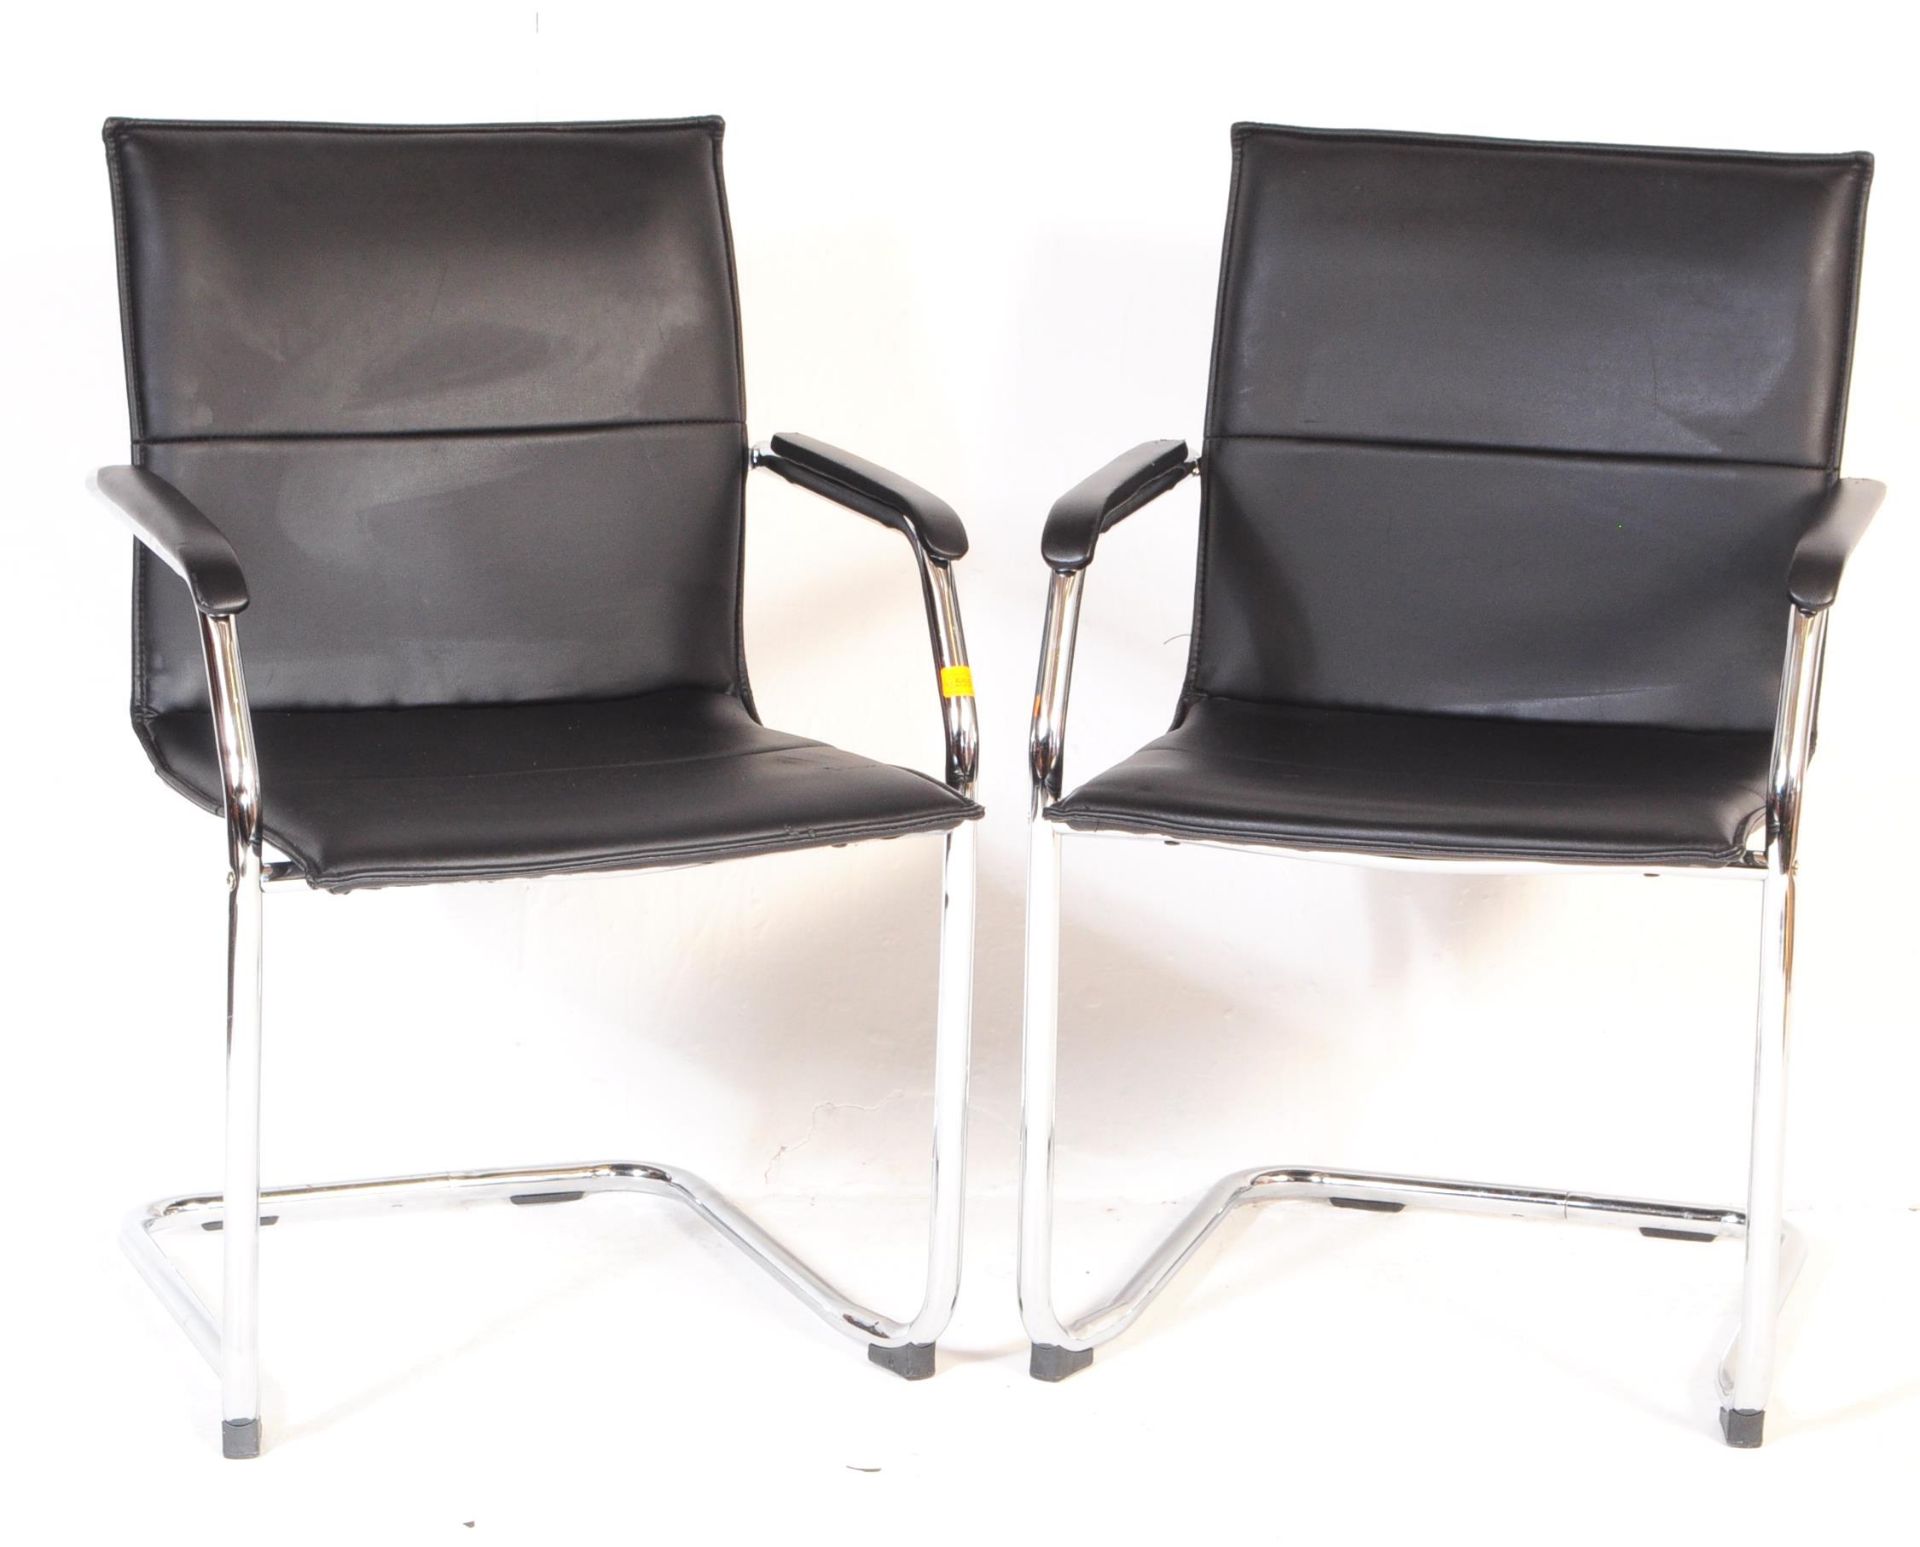 PAIR OF BLACK LEATHER & CHROME CANTILEVER OFFICE ARMCHAIRS - Image 2 of 4